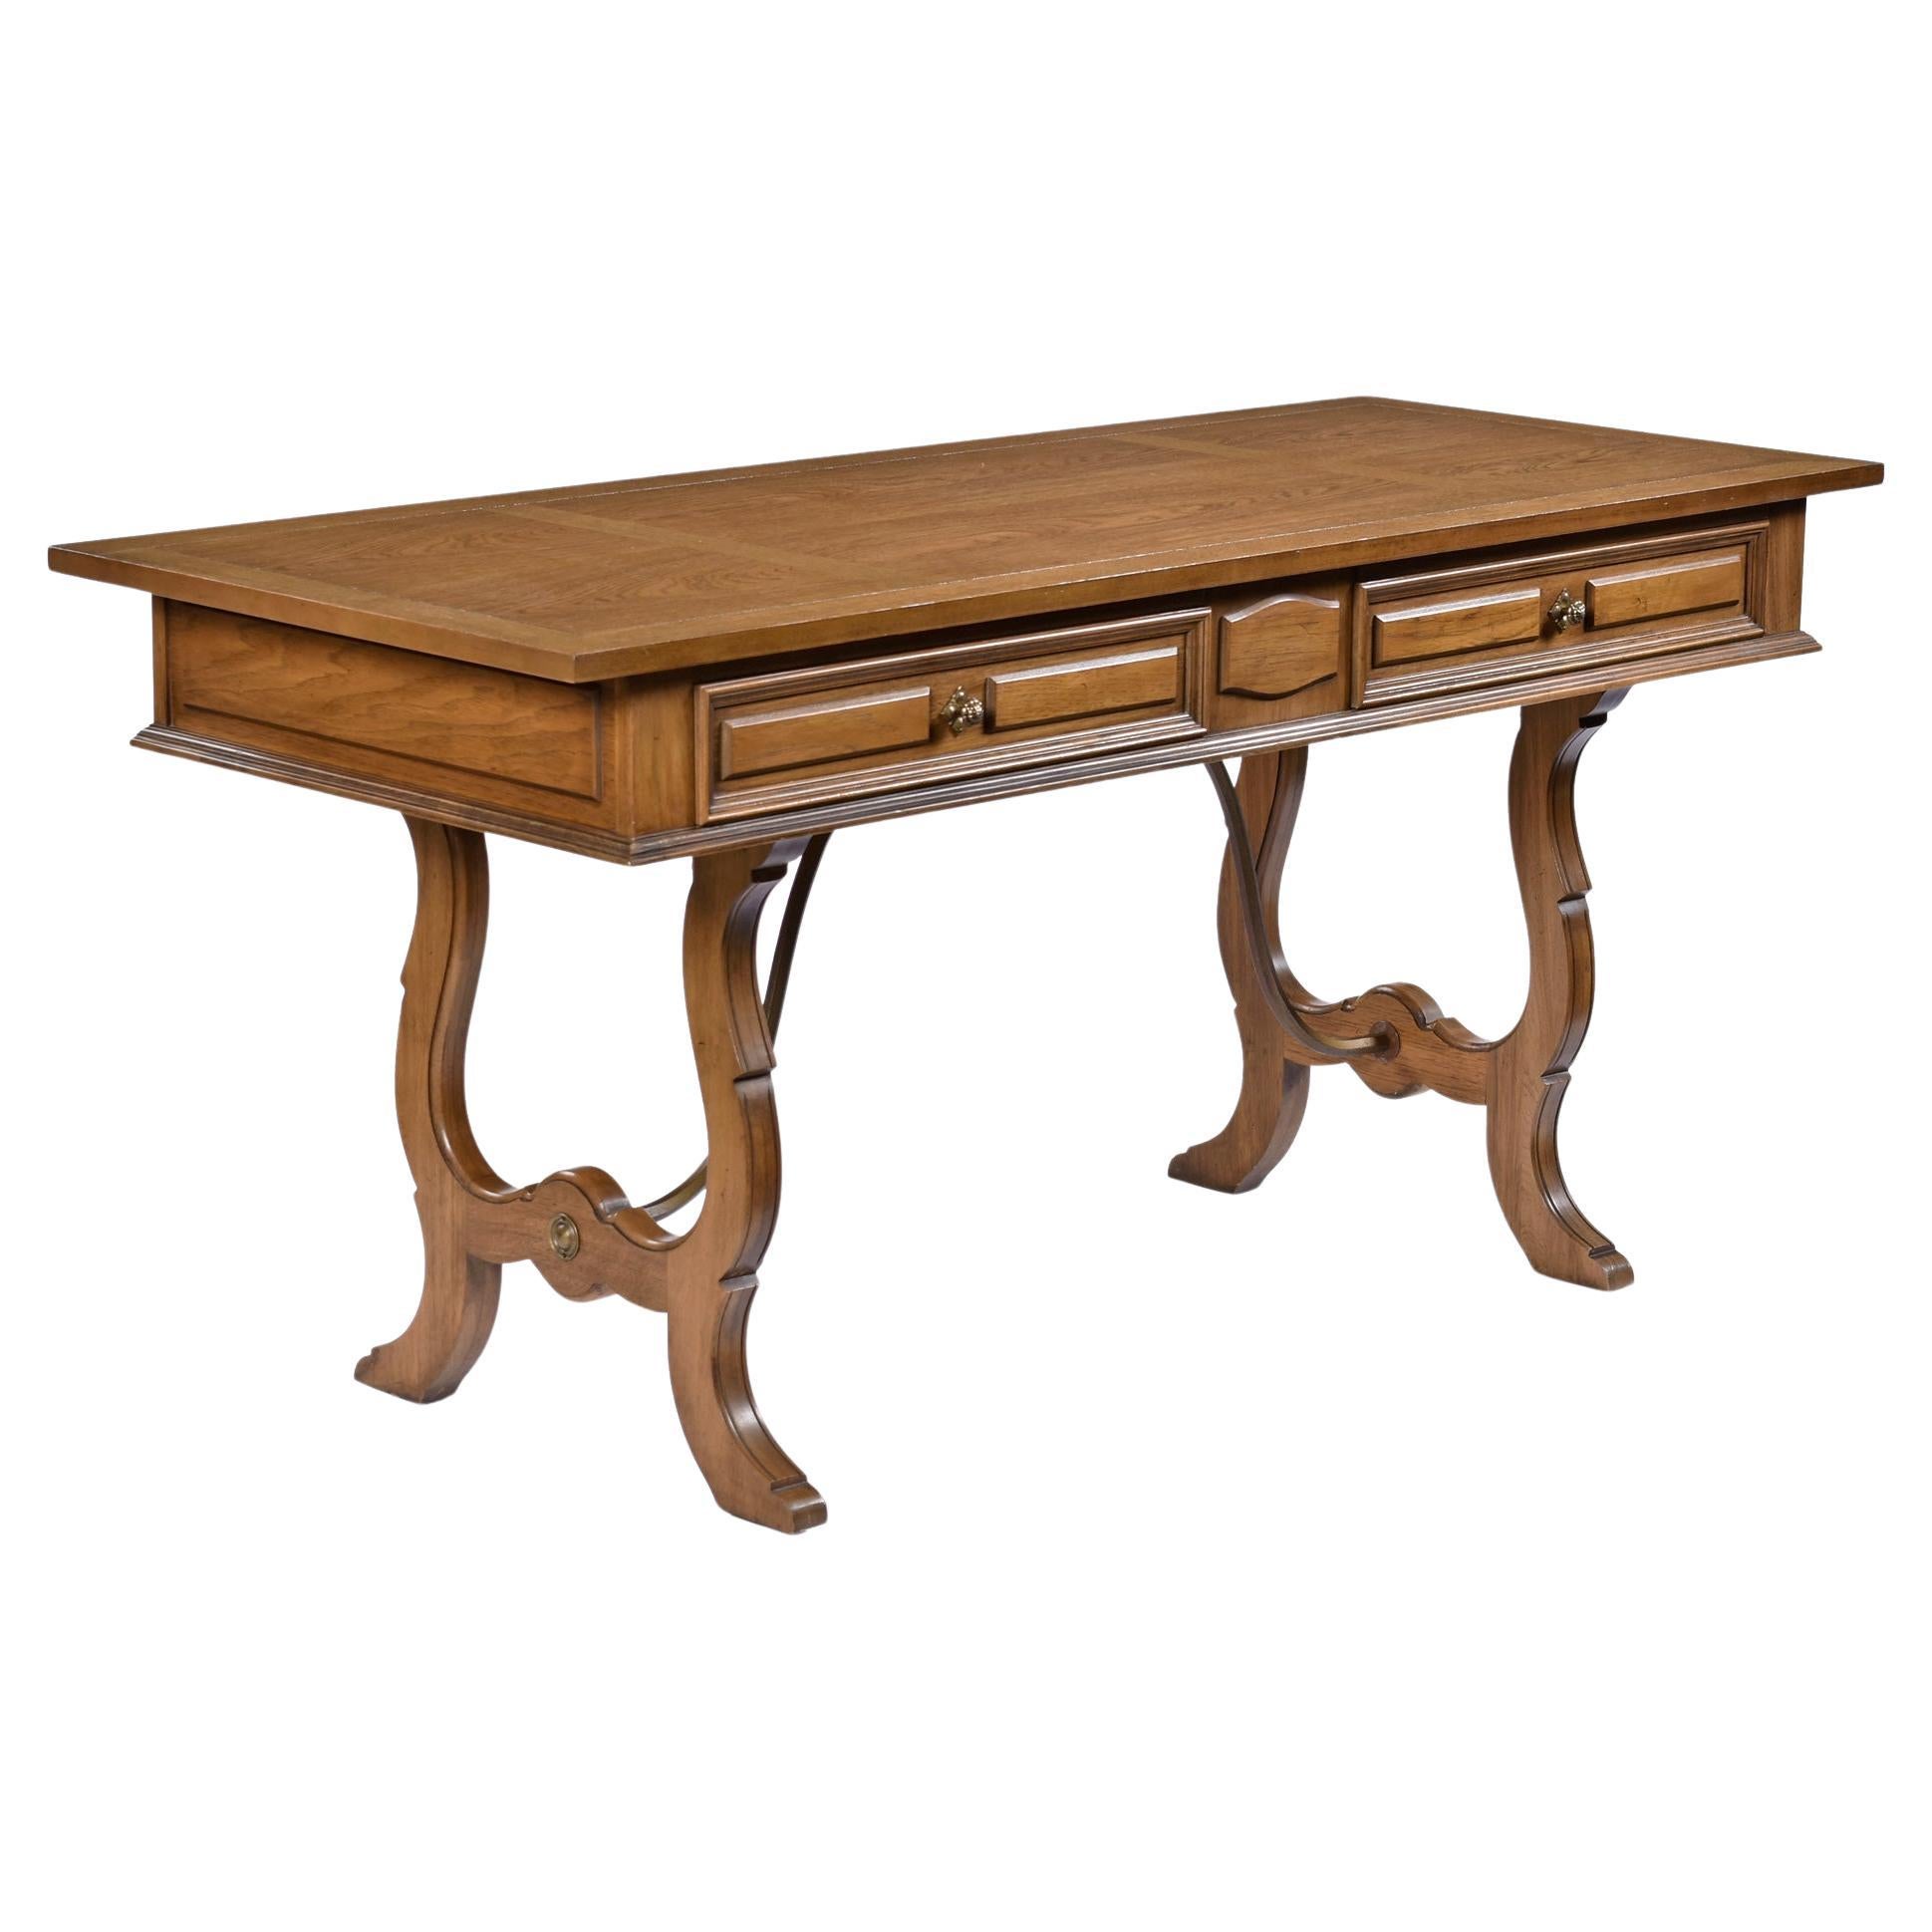 1960's English Regency Style Pecan Desk Console by Thomasville For Sale